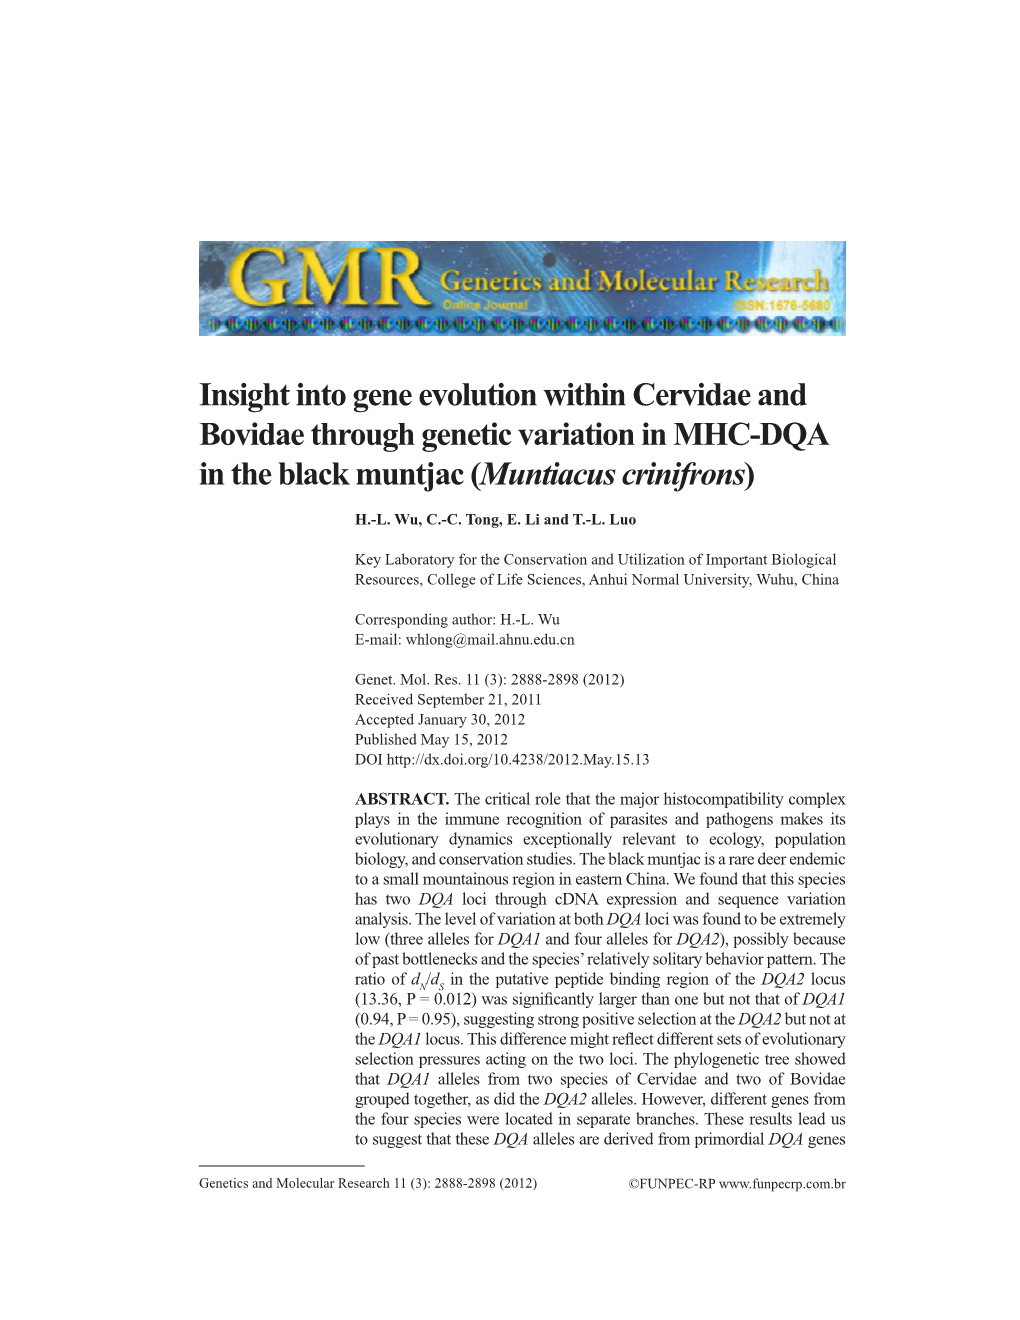 Insight Into Gene Evolution Within Cervidae and Bovidae Through Genetic Variation in MHC-DQA in the Black Muntjac (Muntiacus Crinifrons)